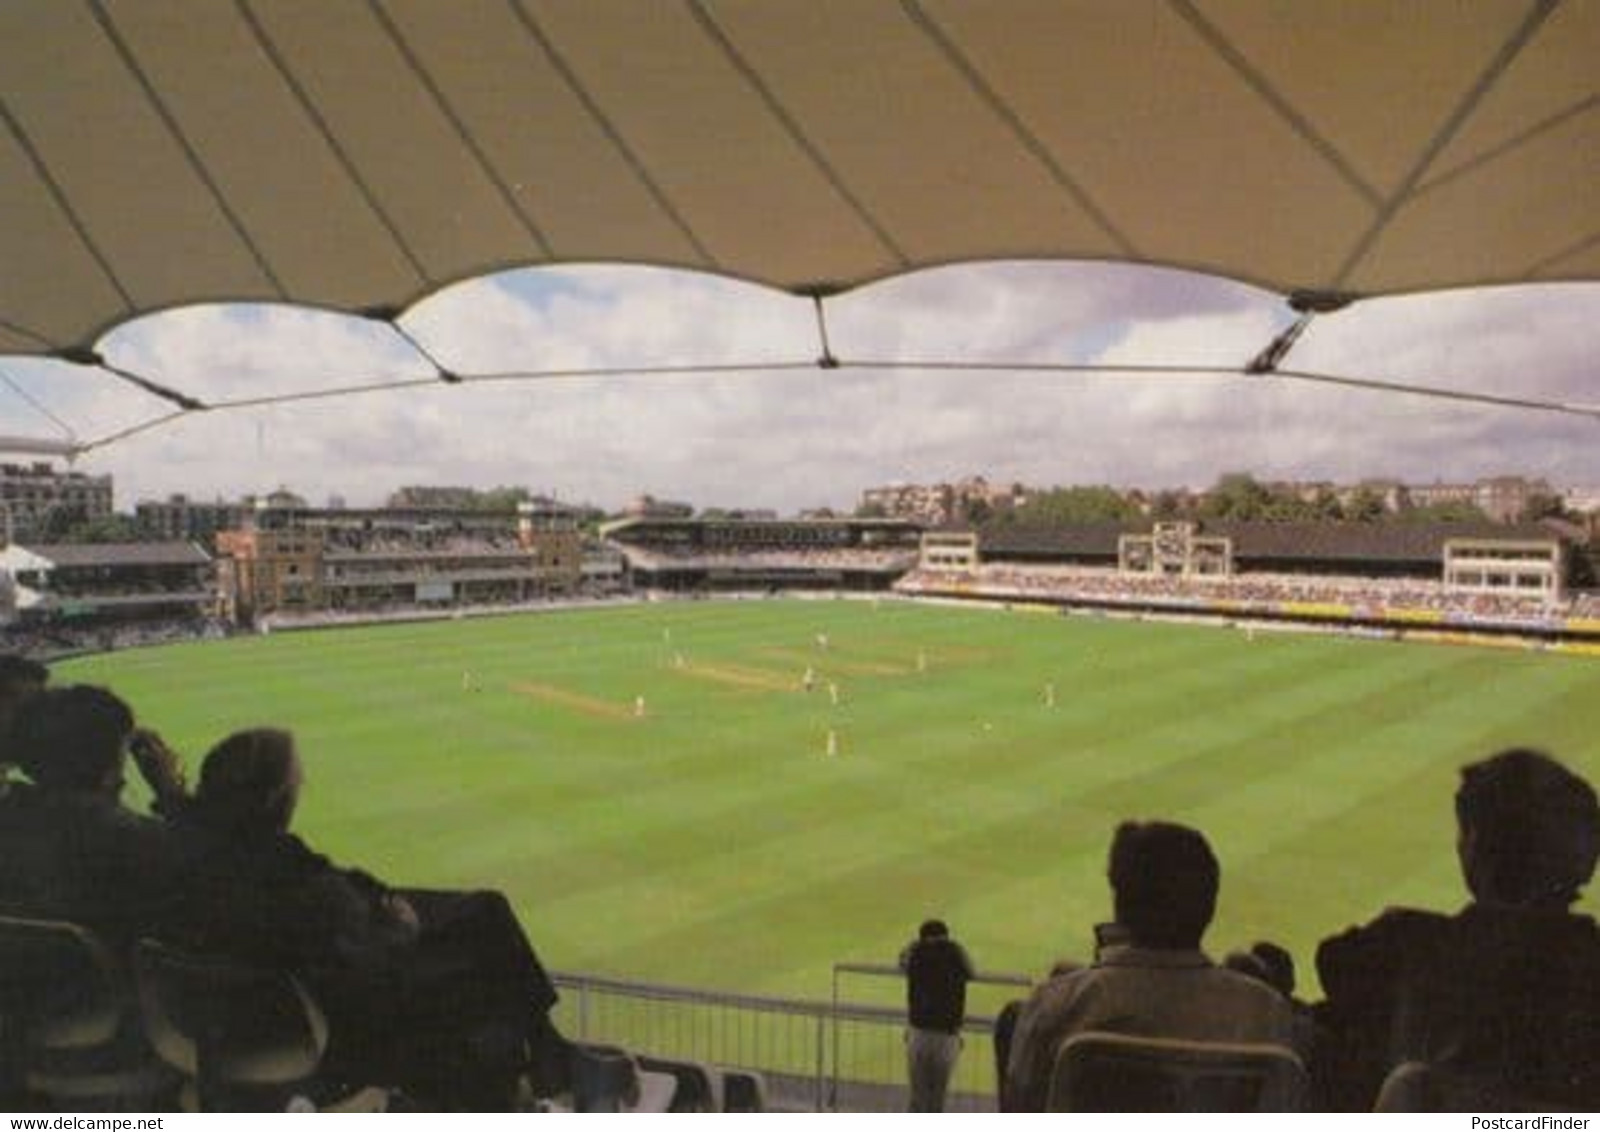 Lords Ground A Match From The New Mound Stand In 1980s Cricket Postcard - Cricket